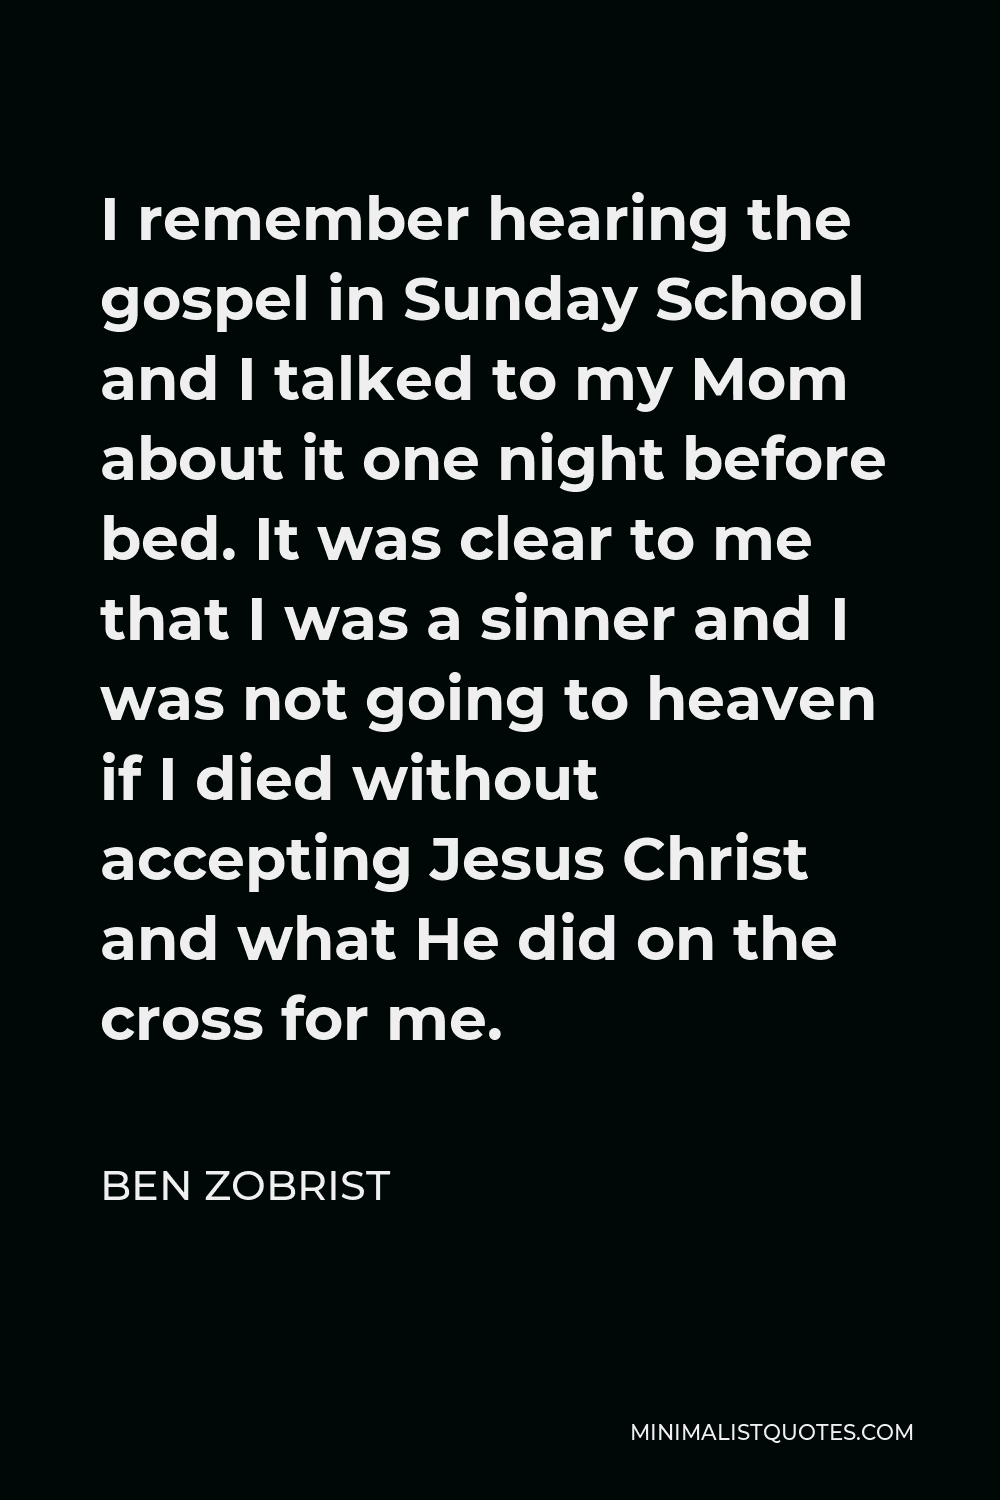 Ben Zobrist Quote - I remember hearing the gospel in Sunday School and I talked to my Mom about it one night before bed. It was clear to me that I was a sinner and I was not going to heaven if I died without accepting Jesus Christ and what He did on the cross for me.